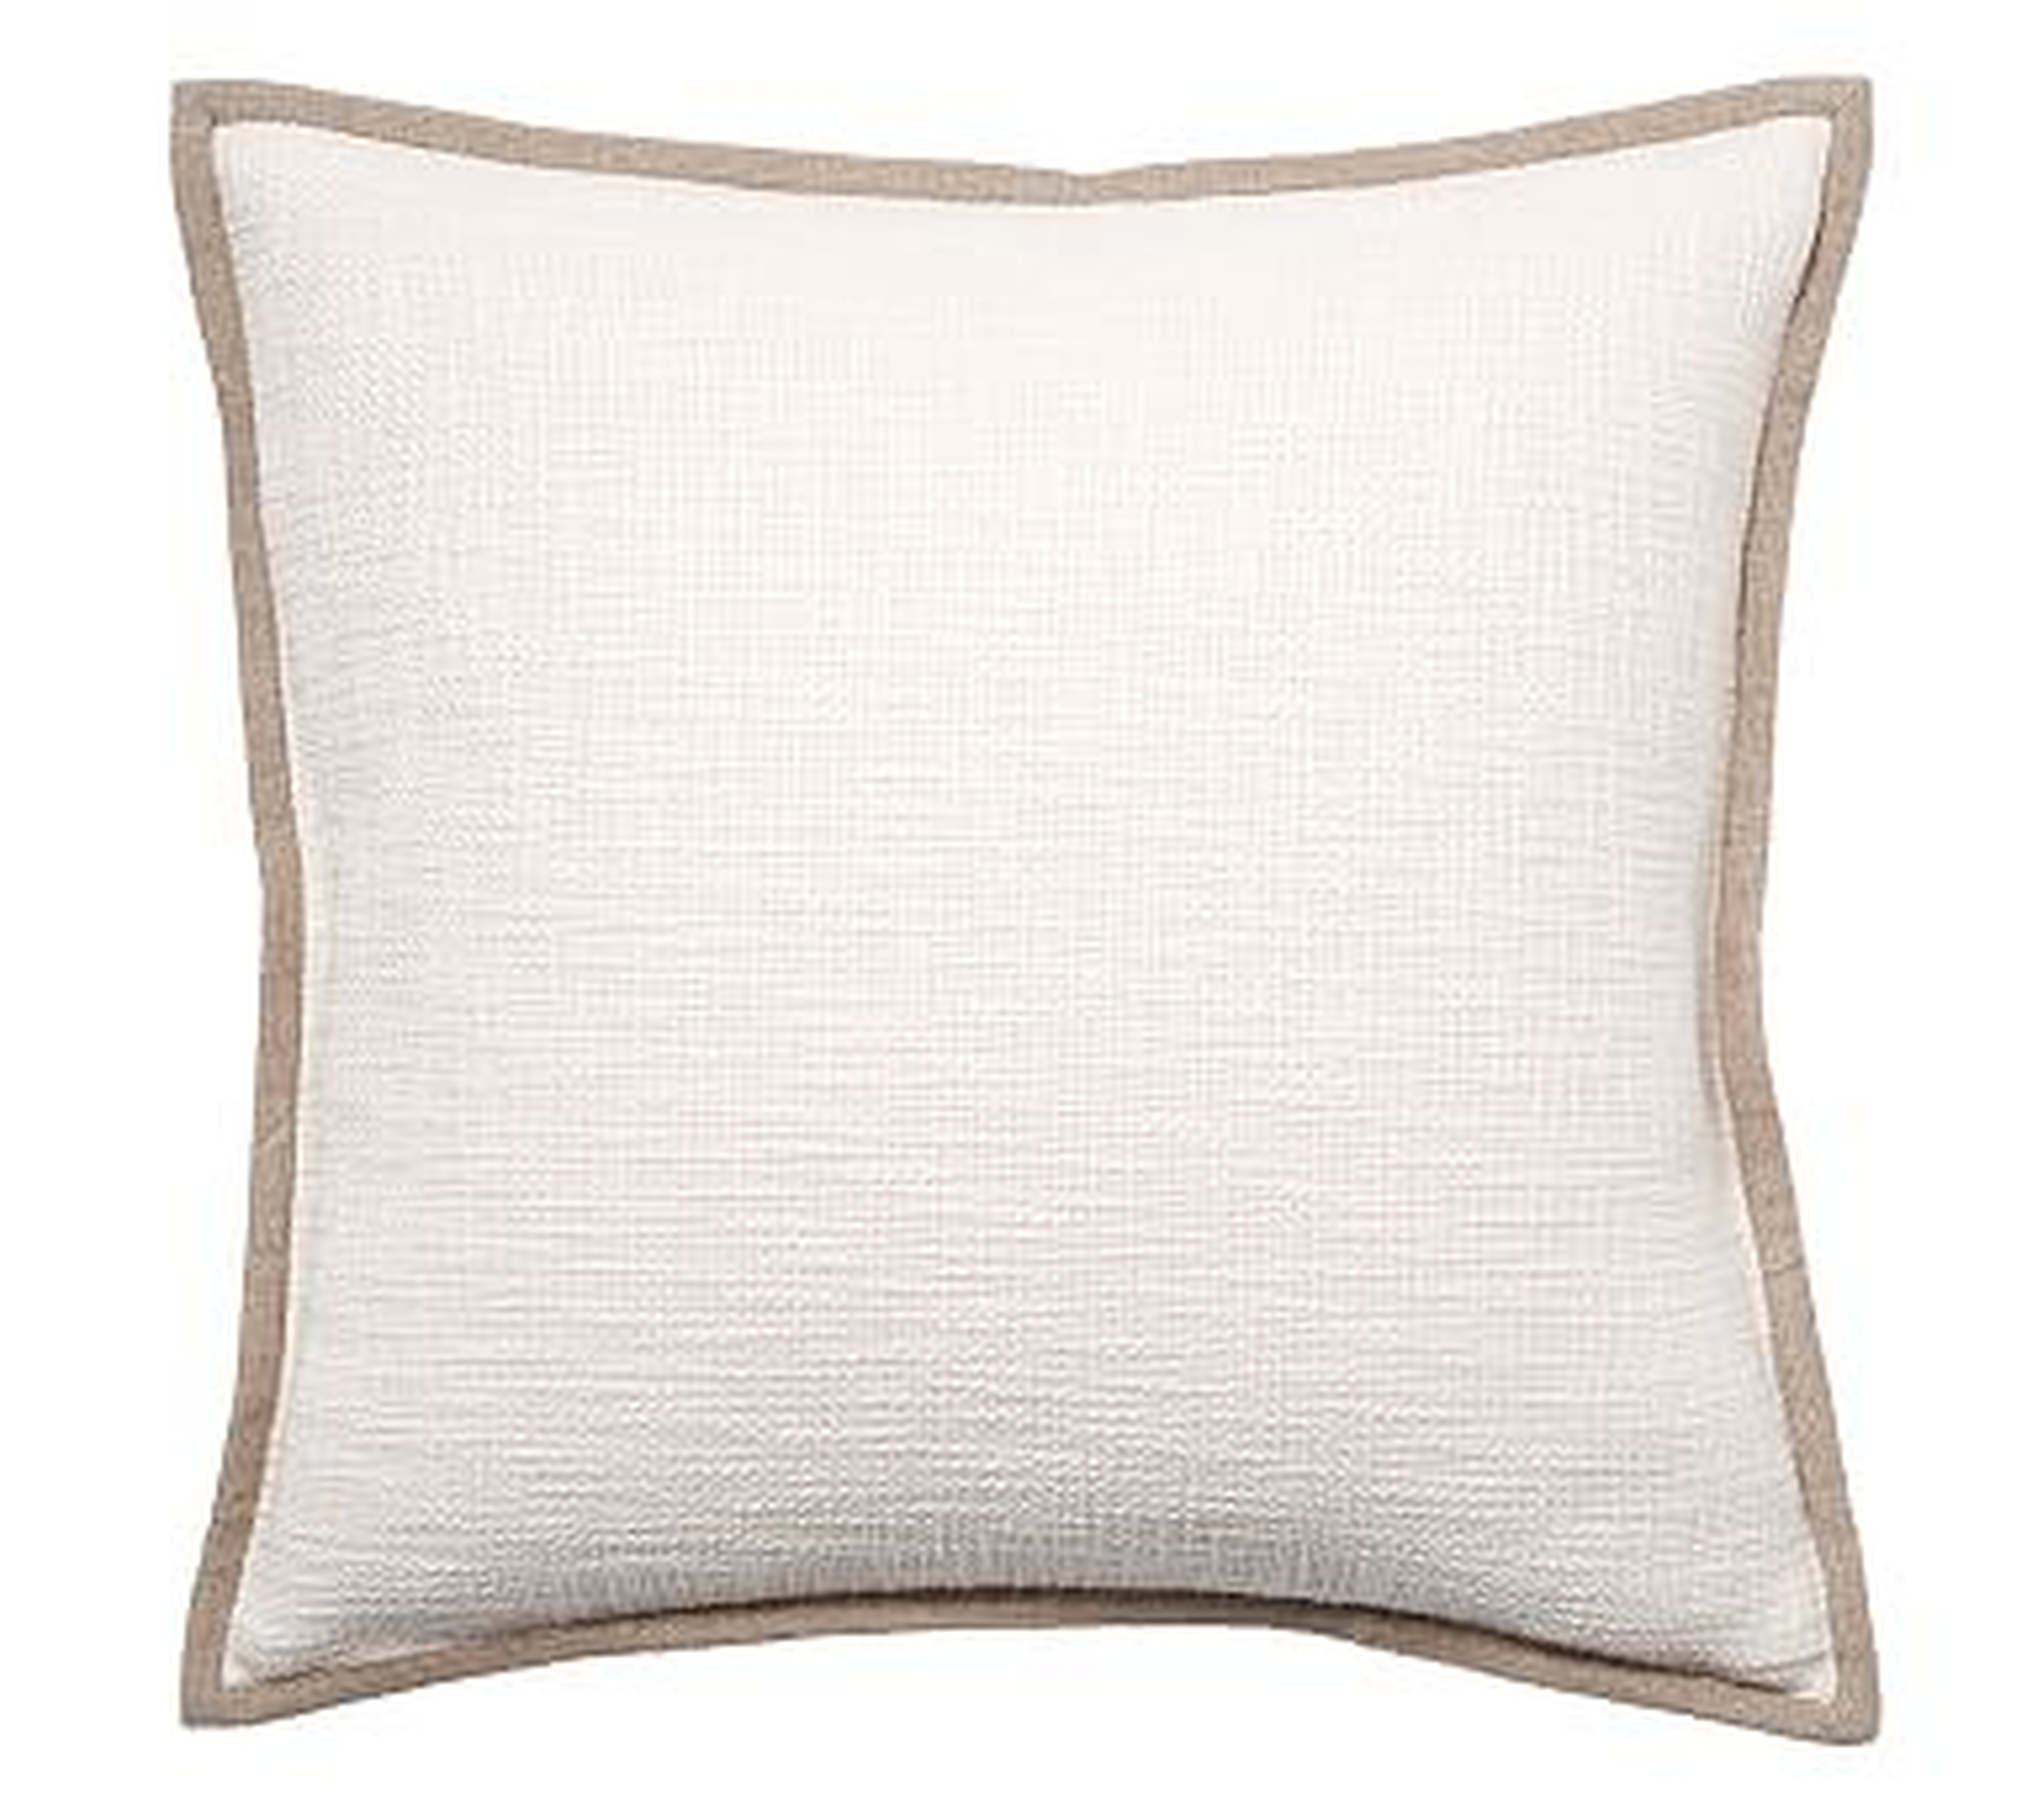 Cotton Basketweave Pillow Cover, 20", Ivory - Pottery Barn